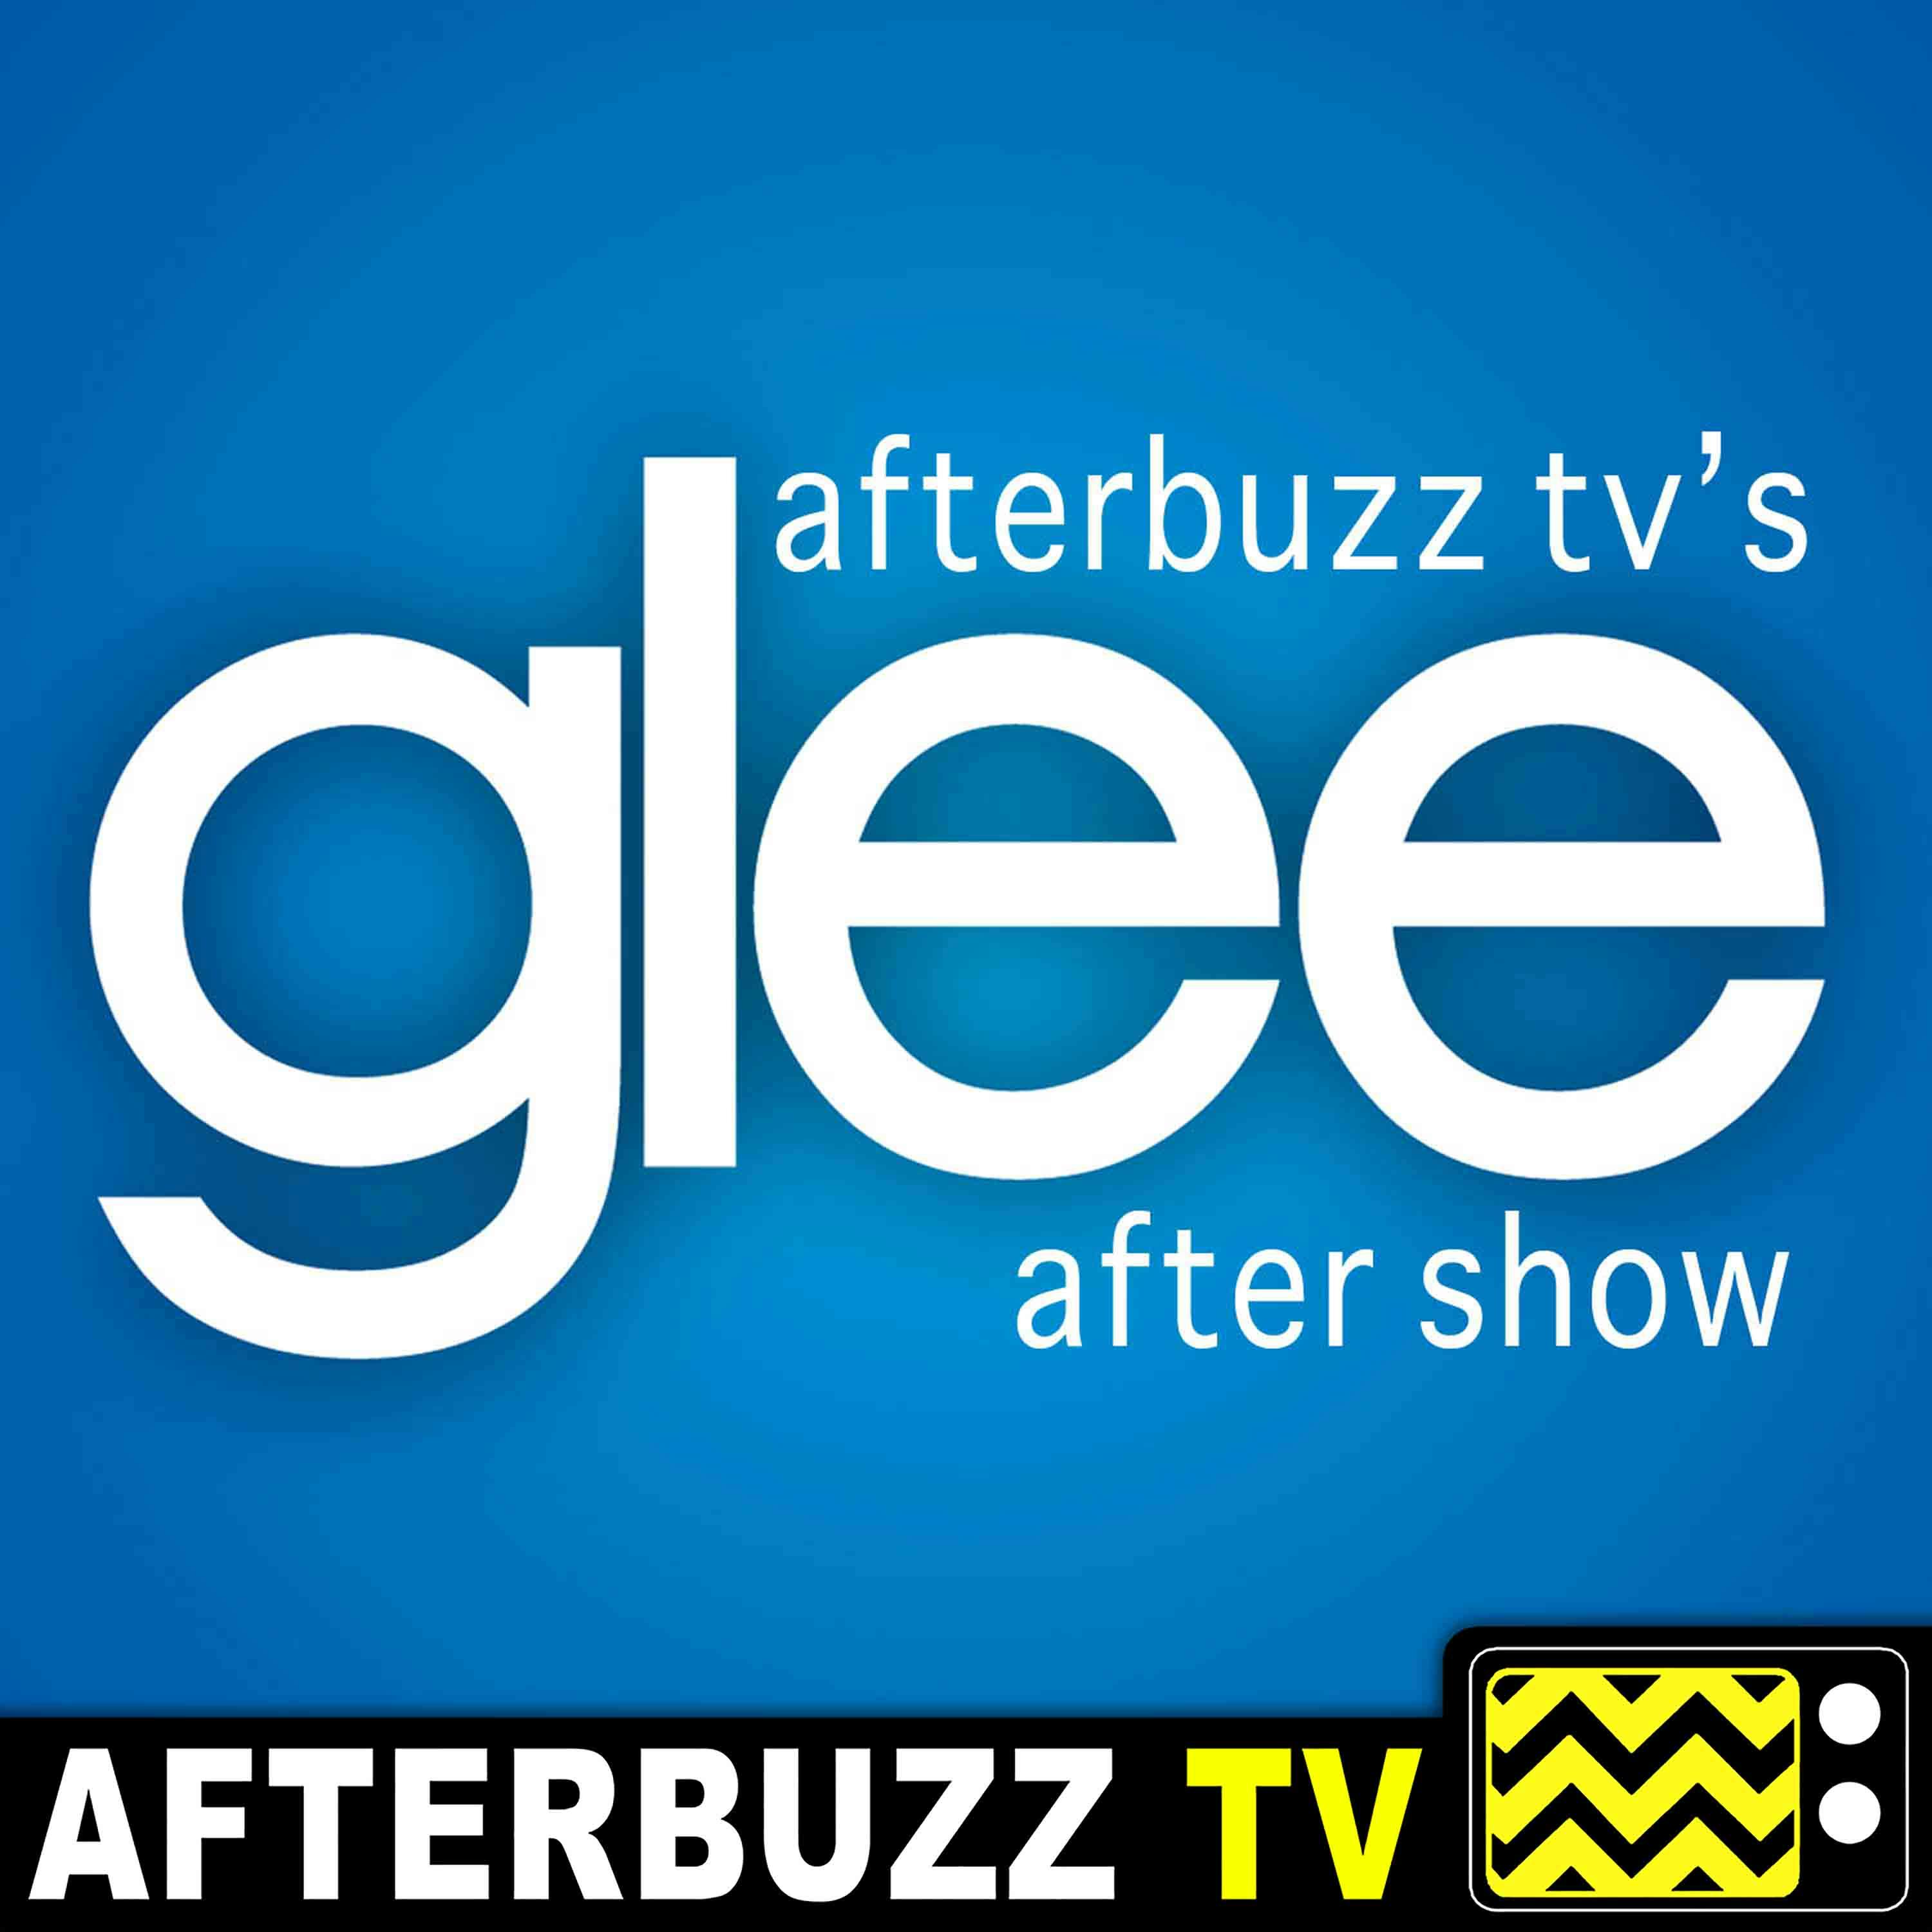 Glee S:5 | Bash E:15 | AfterBuzz TV AfterShow